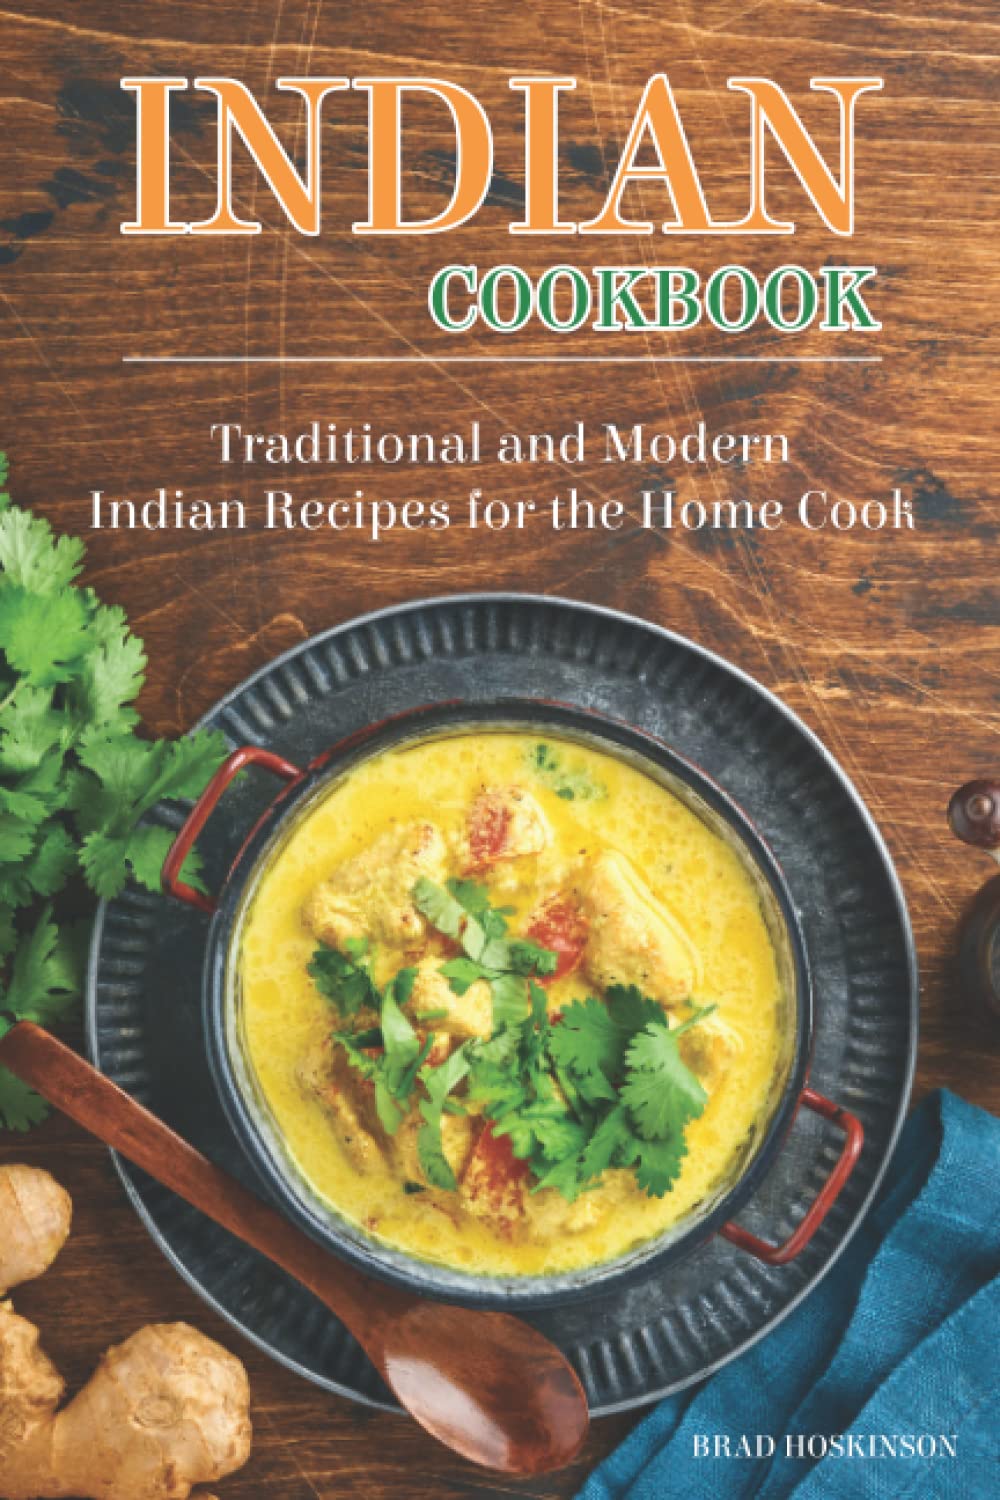 Indian Cookbook: Traditional and Modern Indian Recipes for the Home Cook